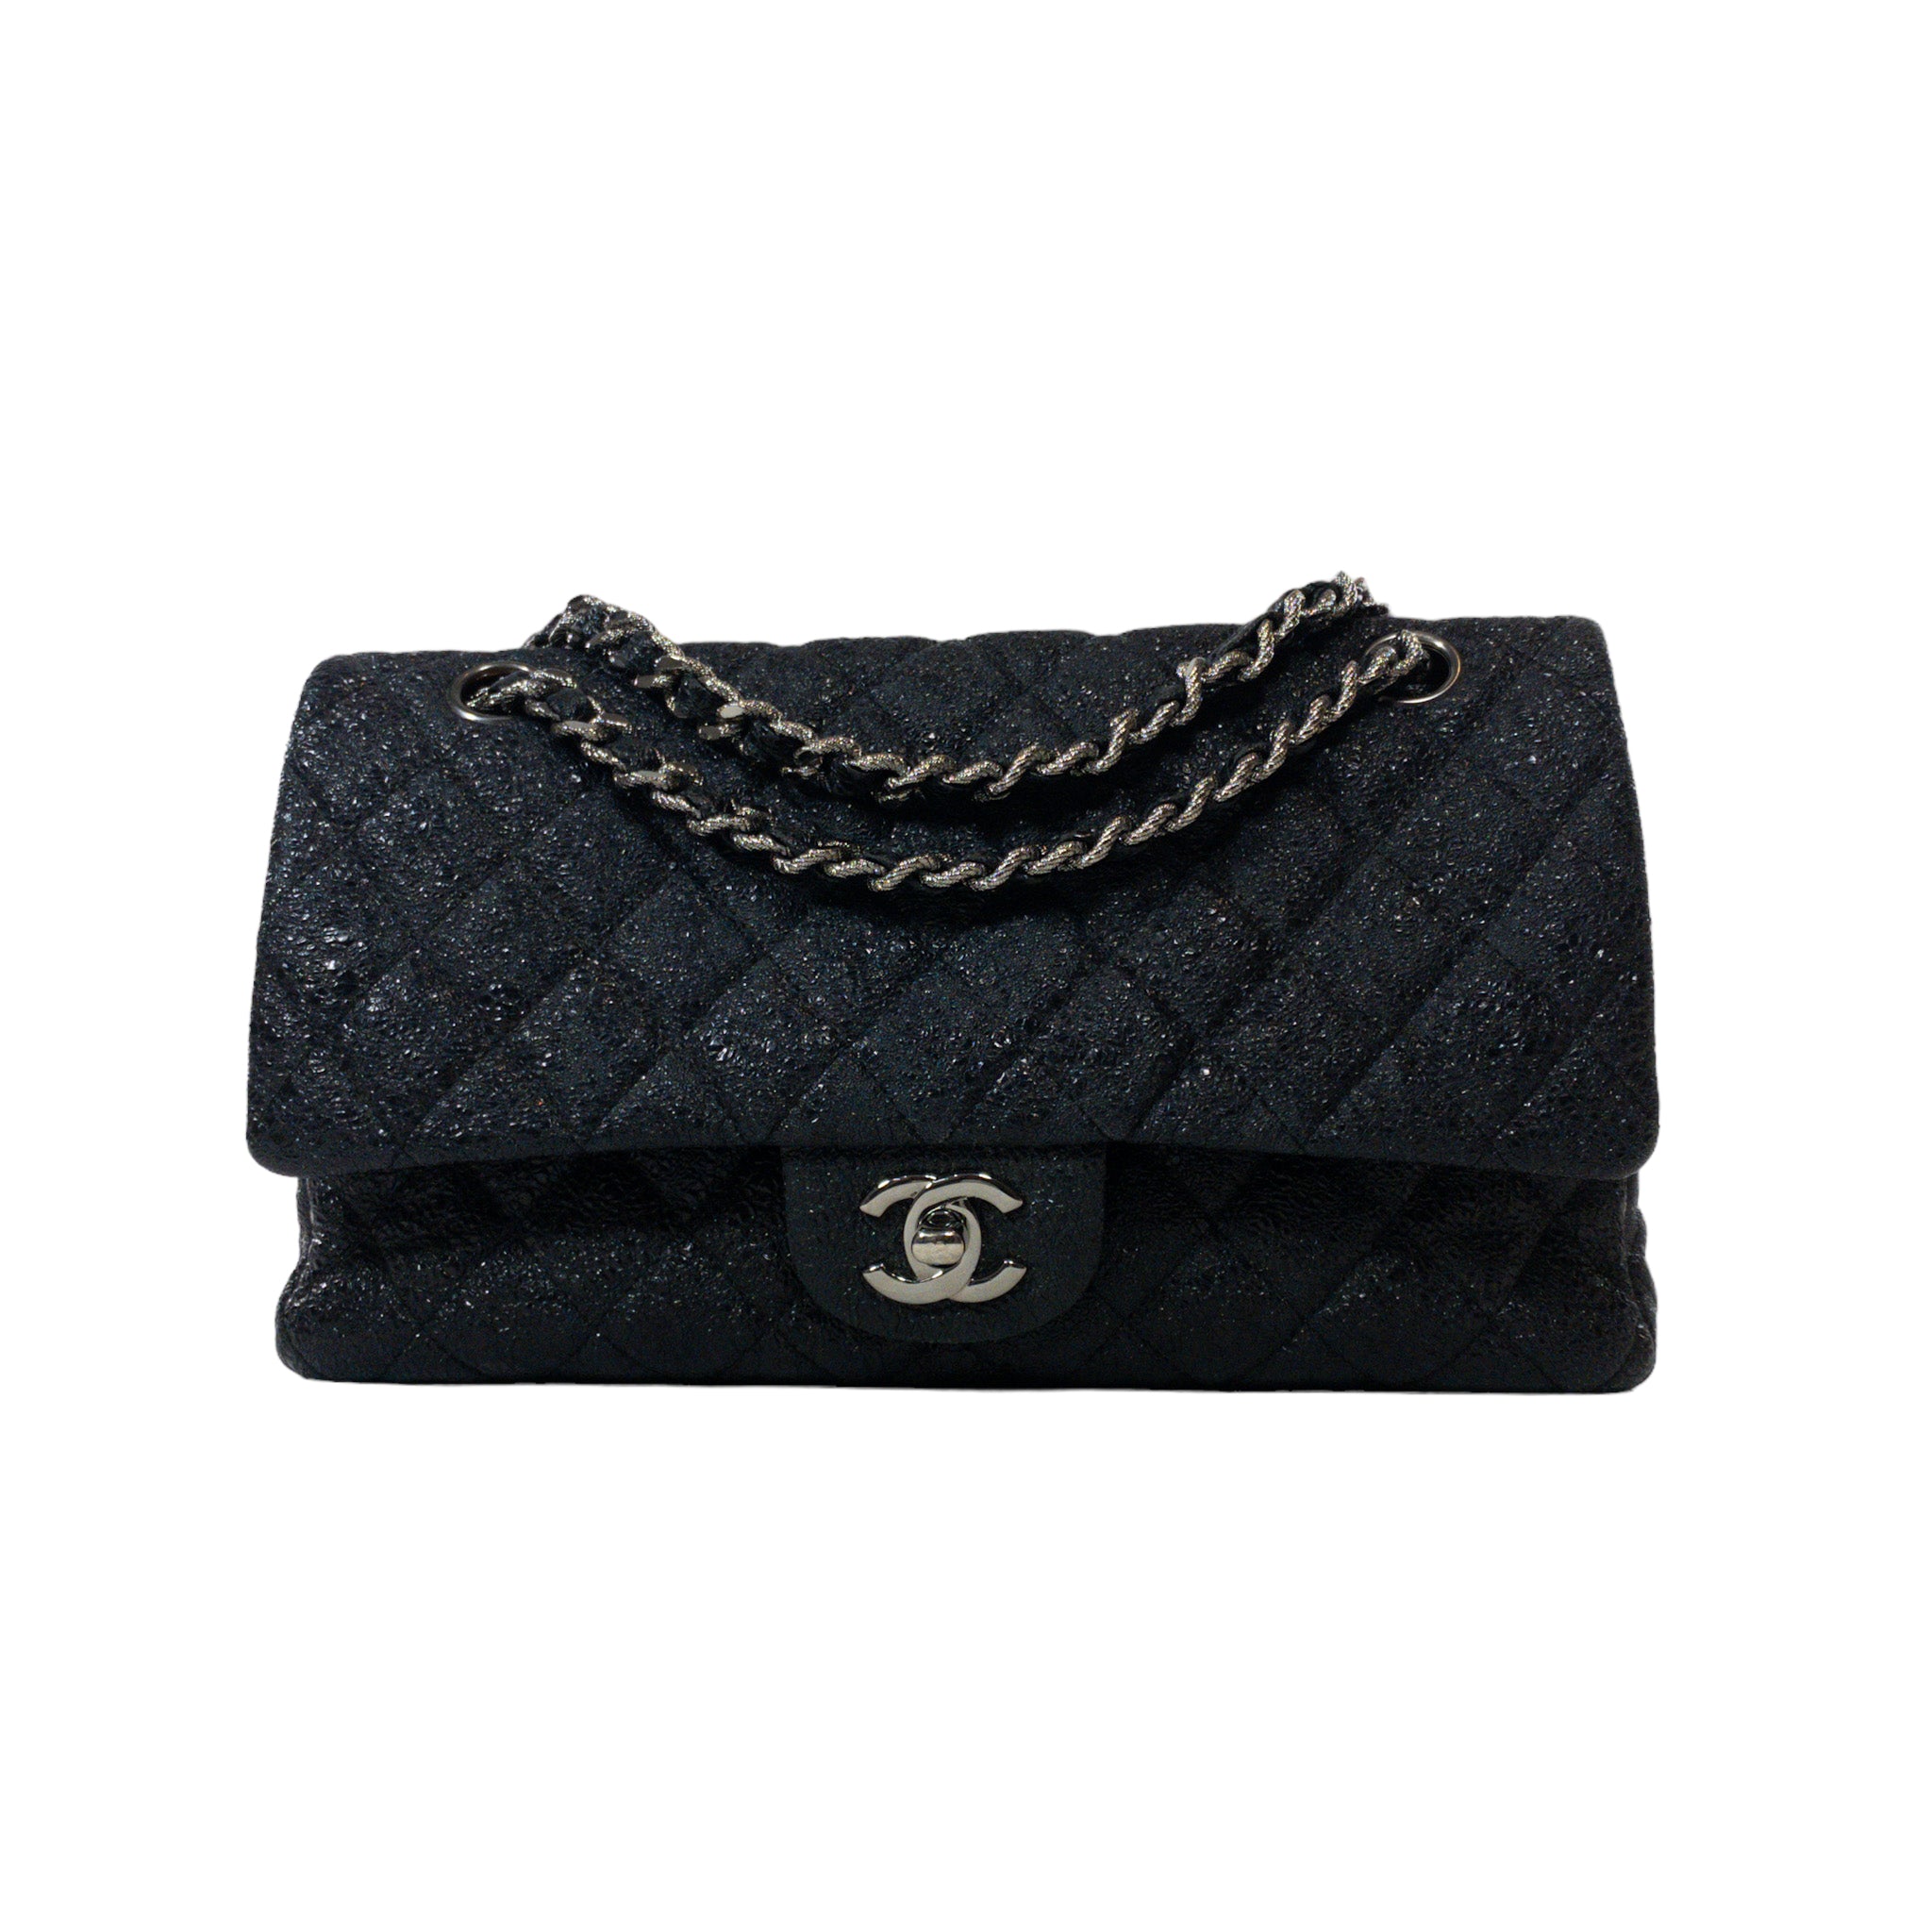 Vintage Chanel Black Quilted Jumbo Classic Flap Bag (Authentic Pre-Owned)